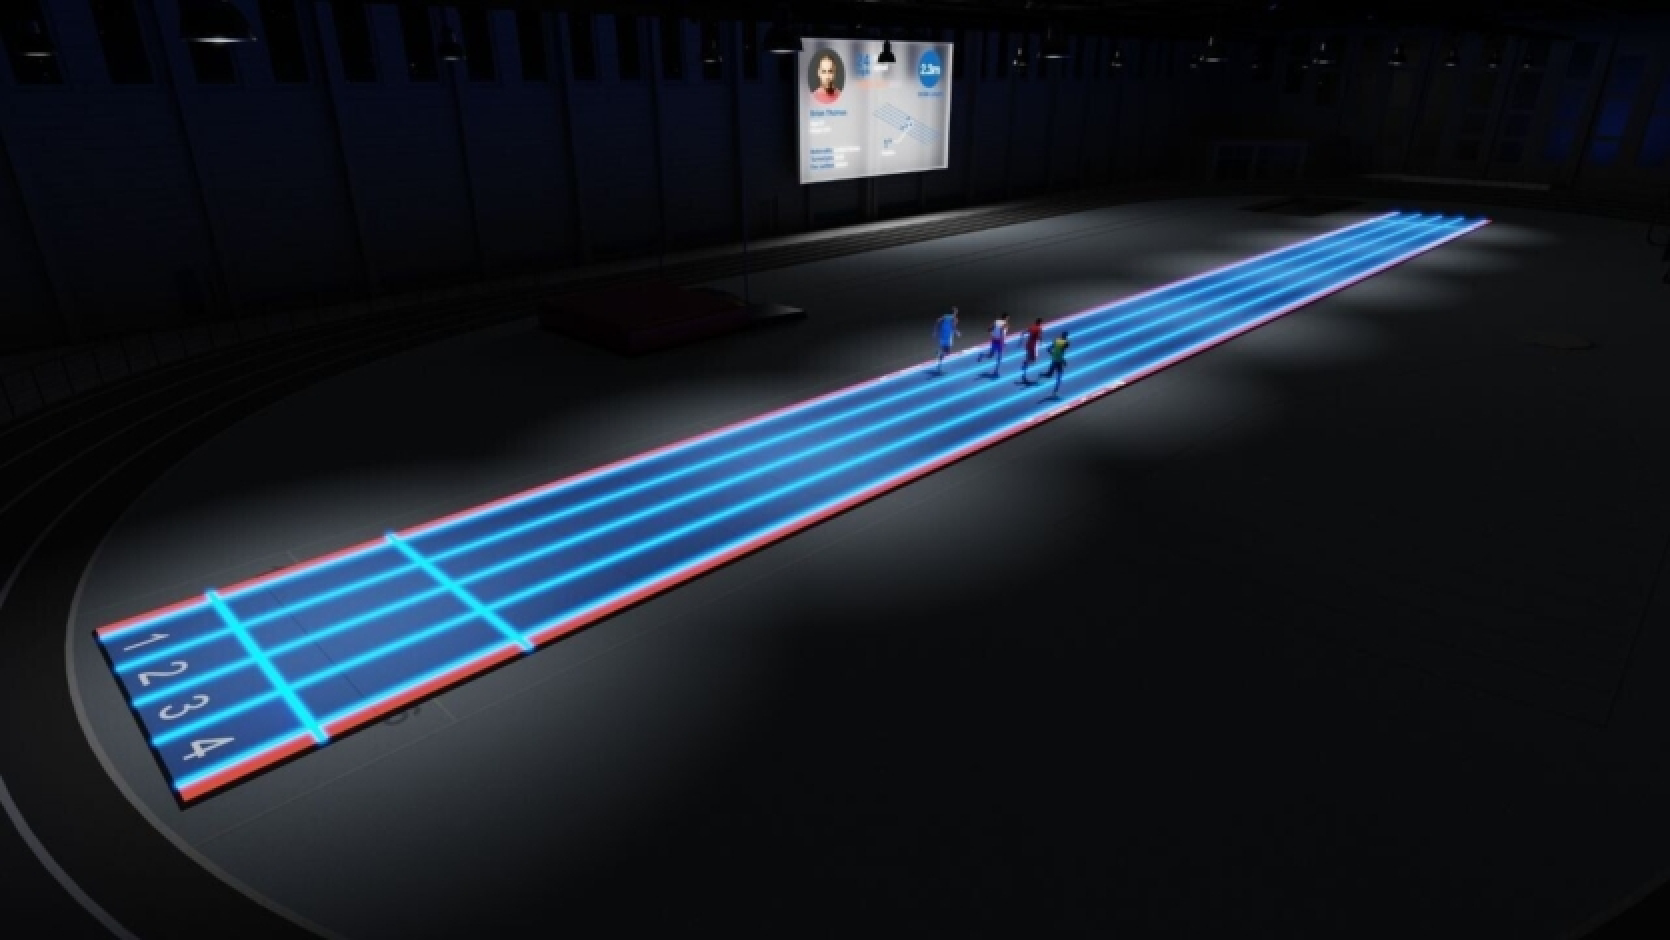 New records and more stats - a treadmill with improved surface and sensors promises to revolutionize athletics